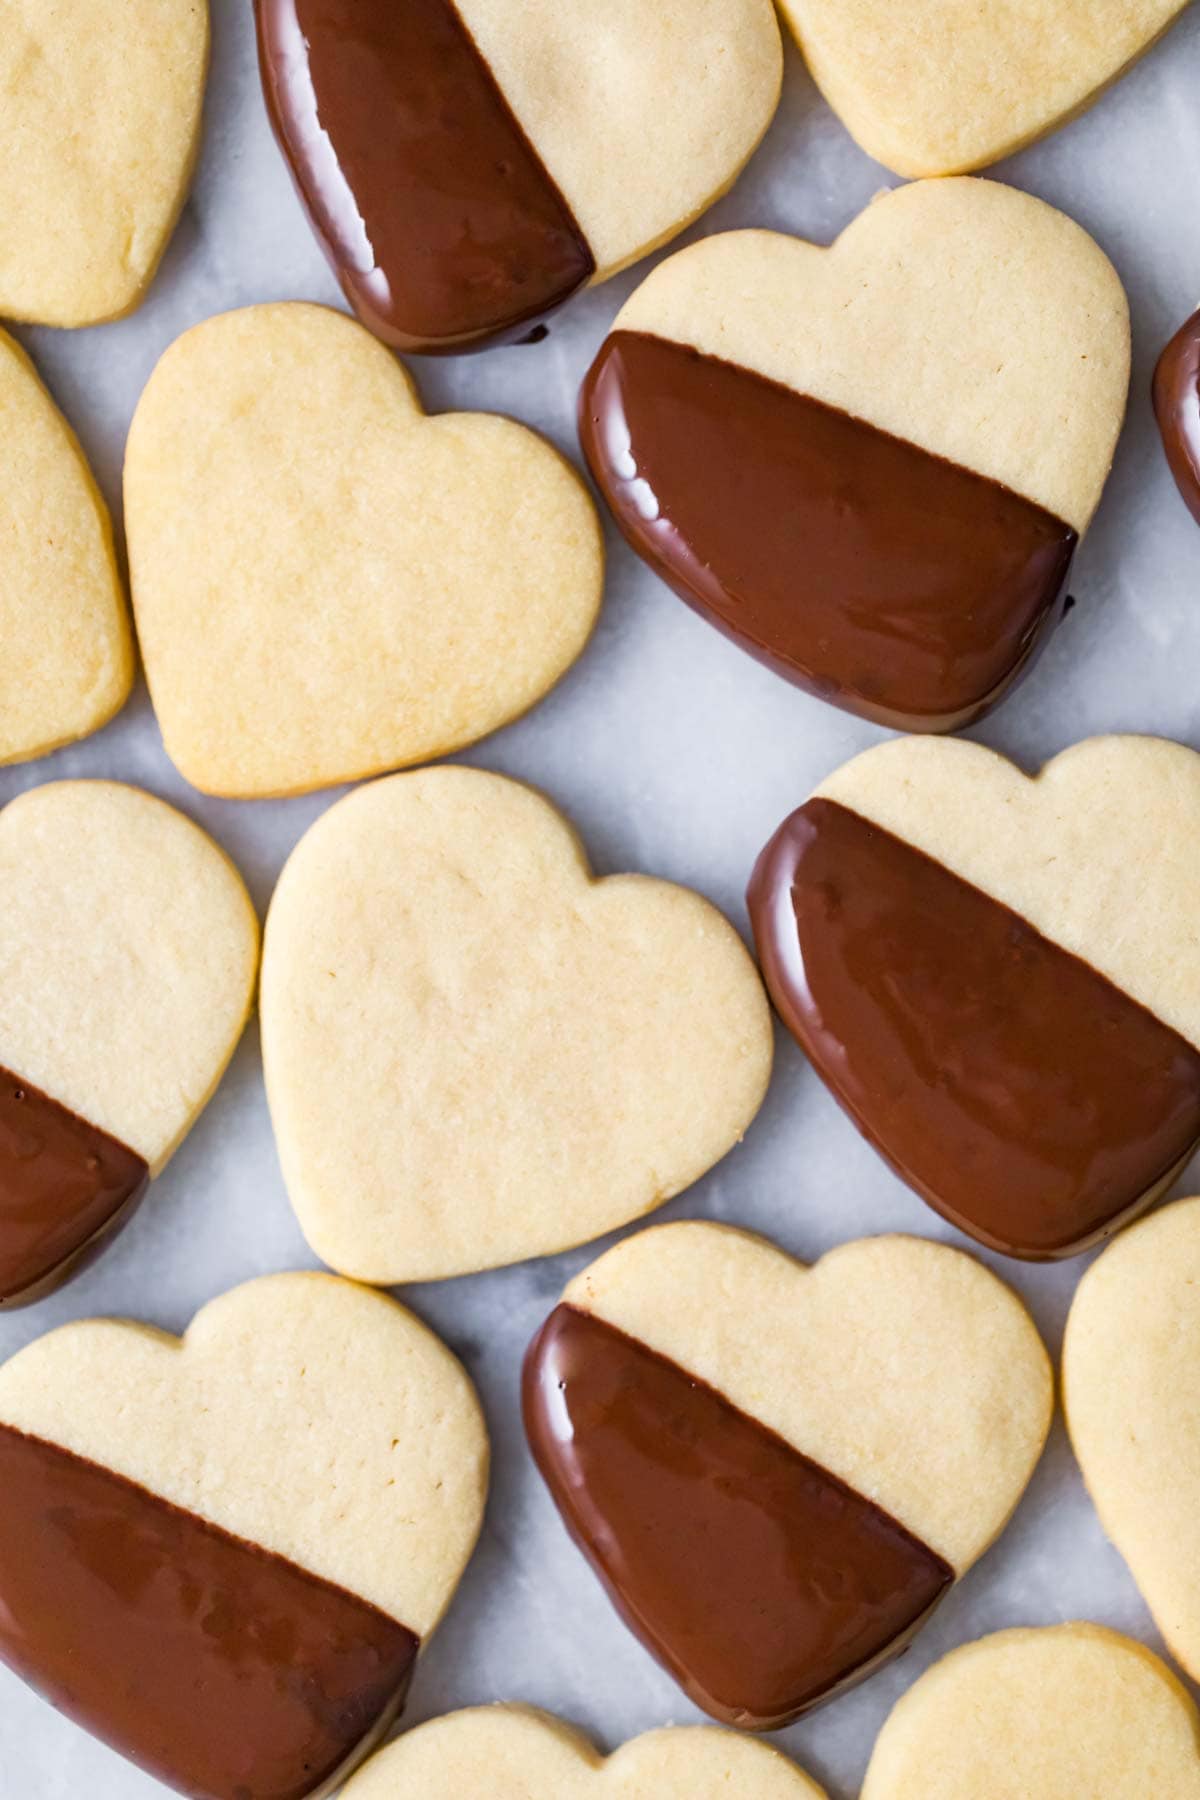 Heart shaped cookies made from a shortbread cookie recipe.